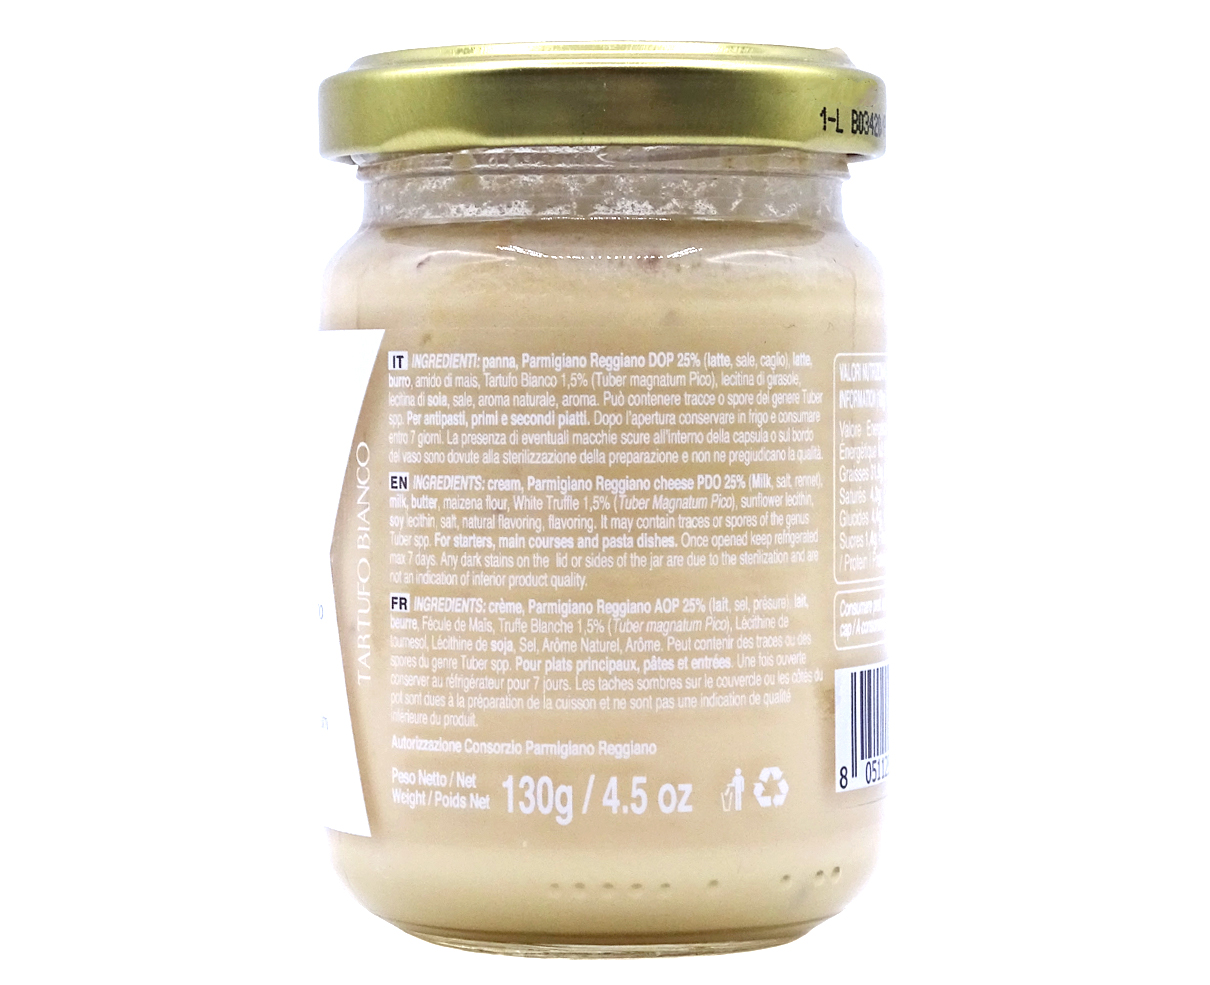 Parmesan cheese and white truffle cream 130gr